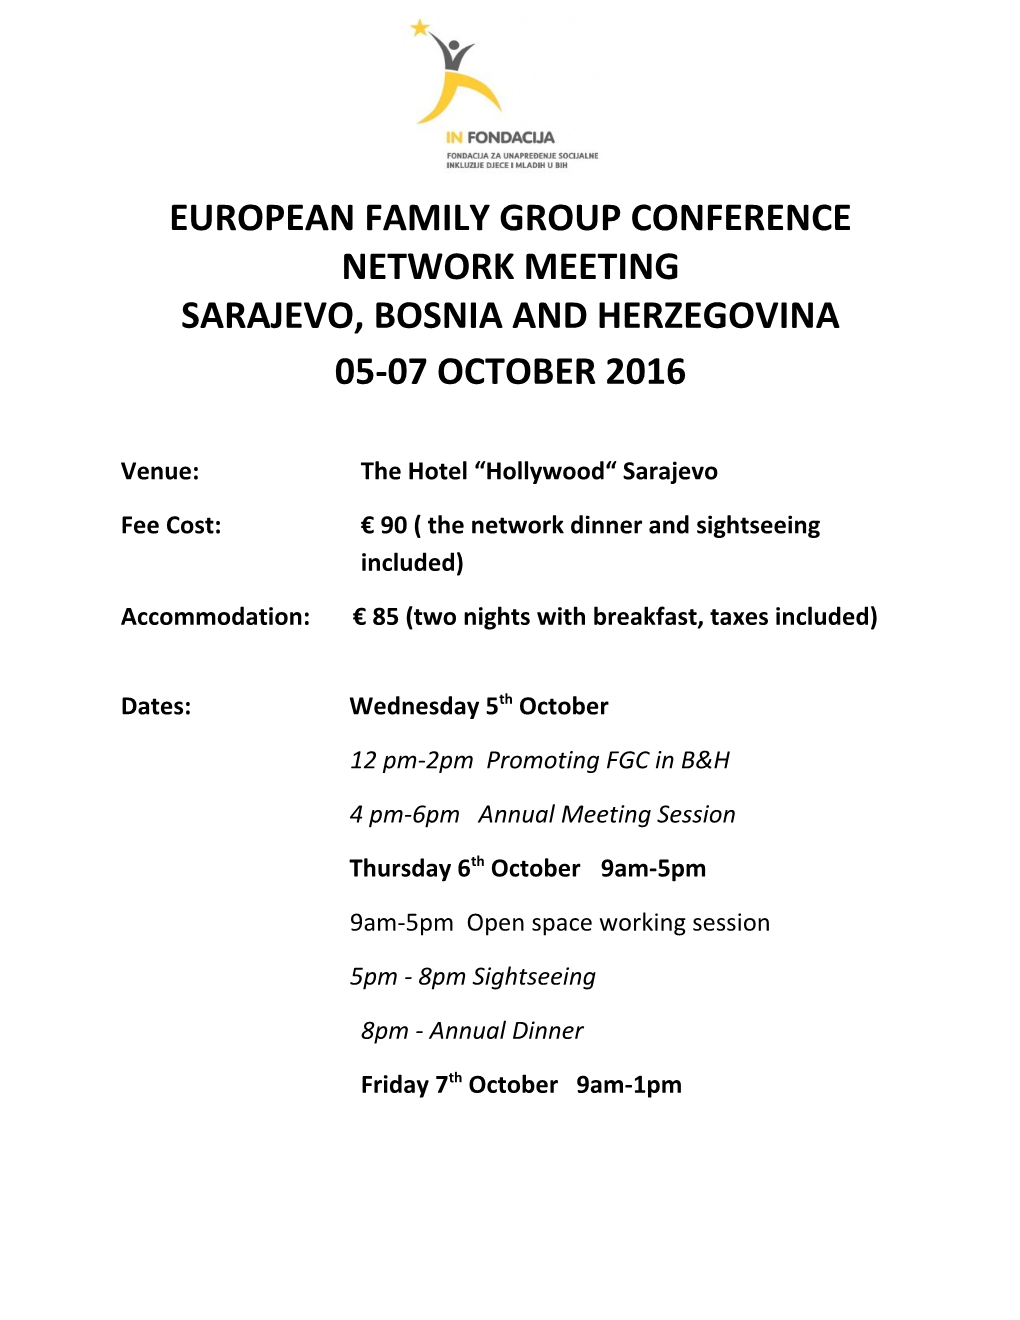 European Family Group Conference Network Meeting